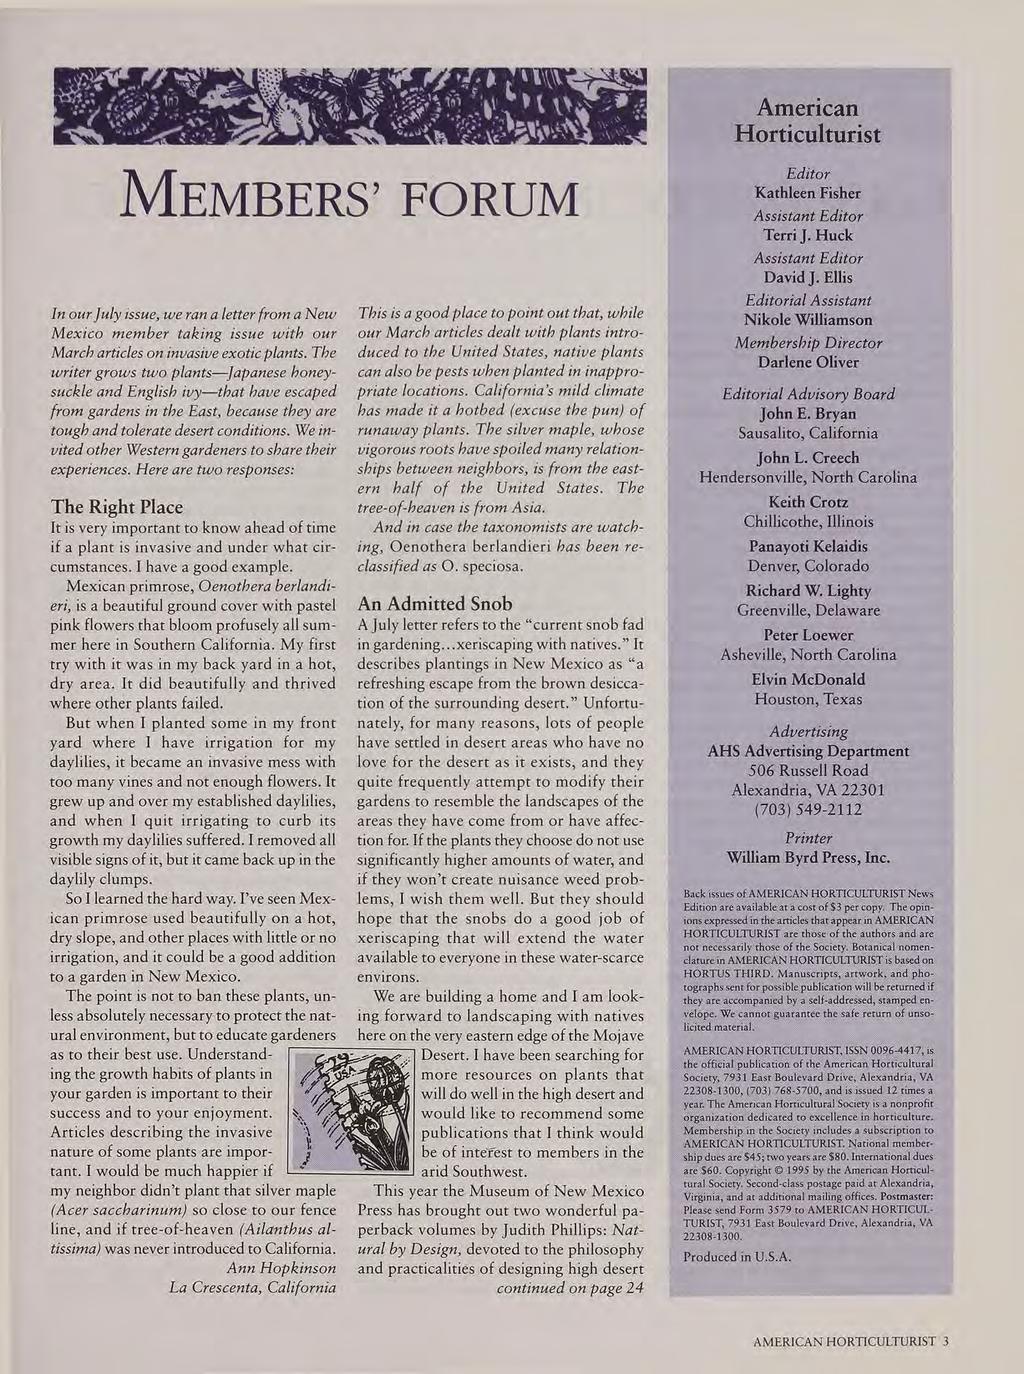 MEMBERS' FORUM In our July issue, we ran a letter from a New Mexico member taking issue with our March articles on invasive exotic plants.